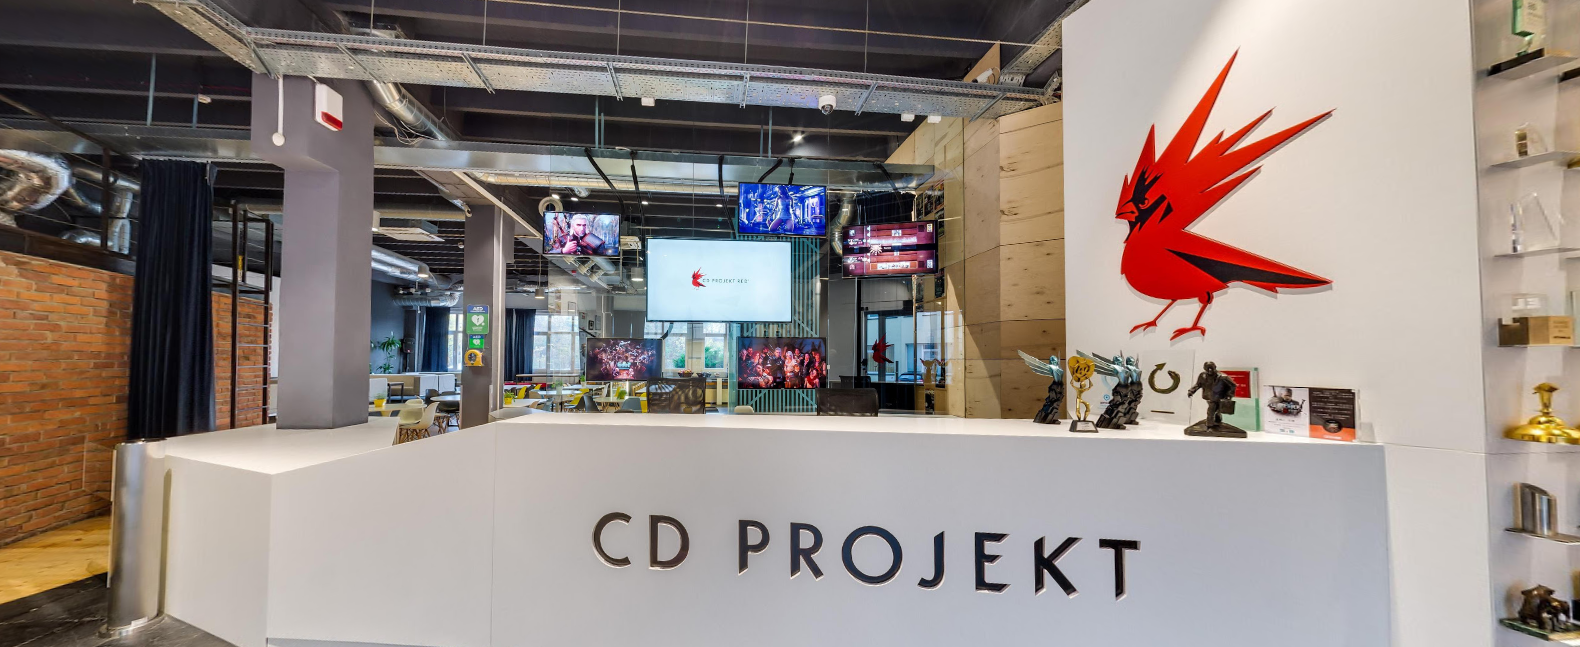 Image for You can do a virtual tour of CD Projekt Red using Google Maps